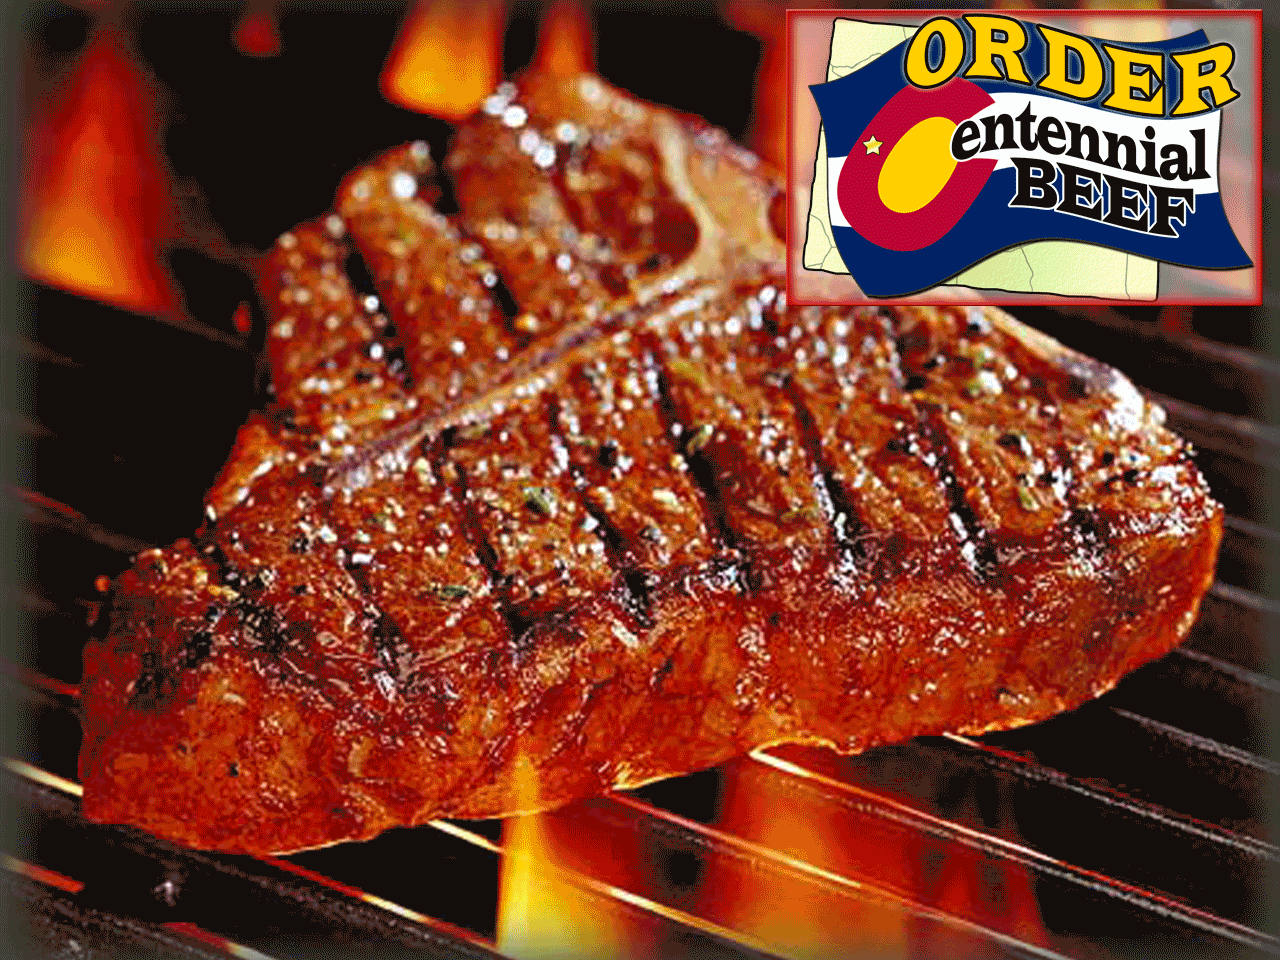 Get Grillin'!  All-Natural, Grass-fed, High-Quality, Dry-Aged Beef from Colorado